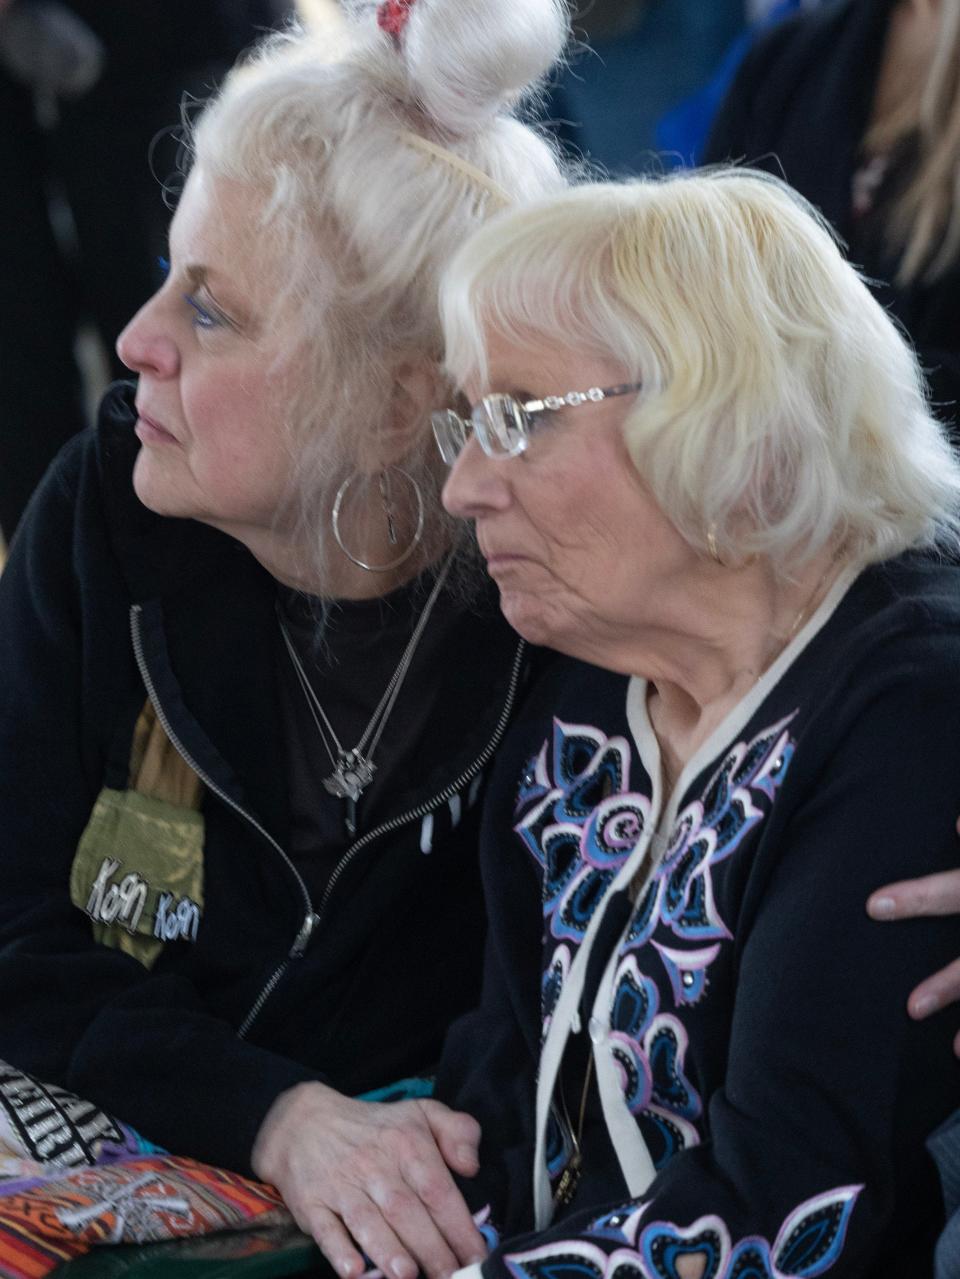 Kelly Rhodes, left, the daughter of Lynn Such, a cousin of U.S. Navy Fireman 1st Class Walter Schleiter, comforts her mother during his military funeral service.